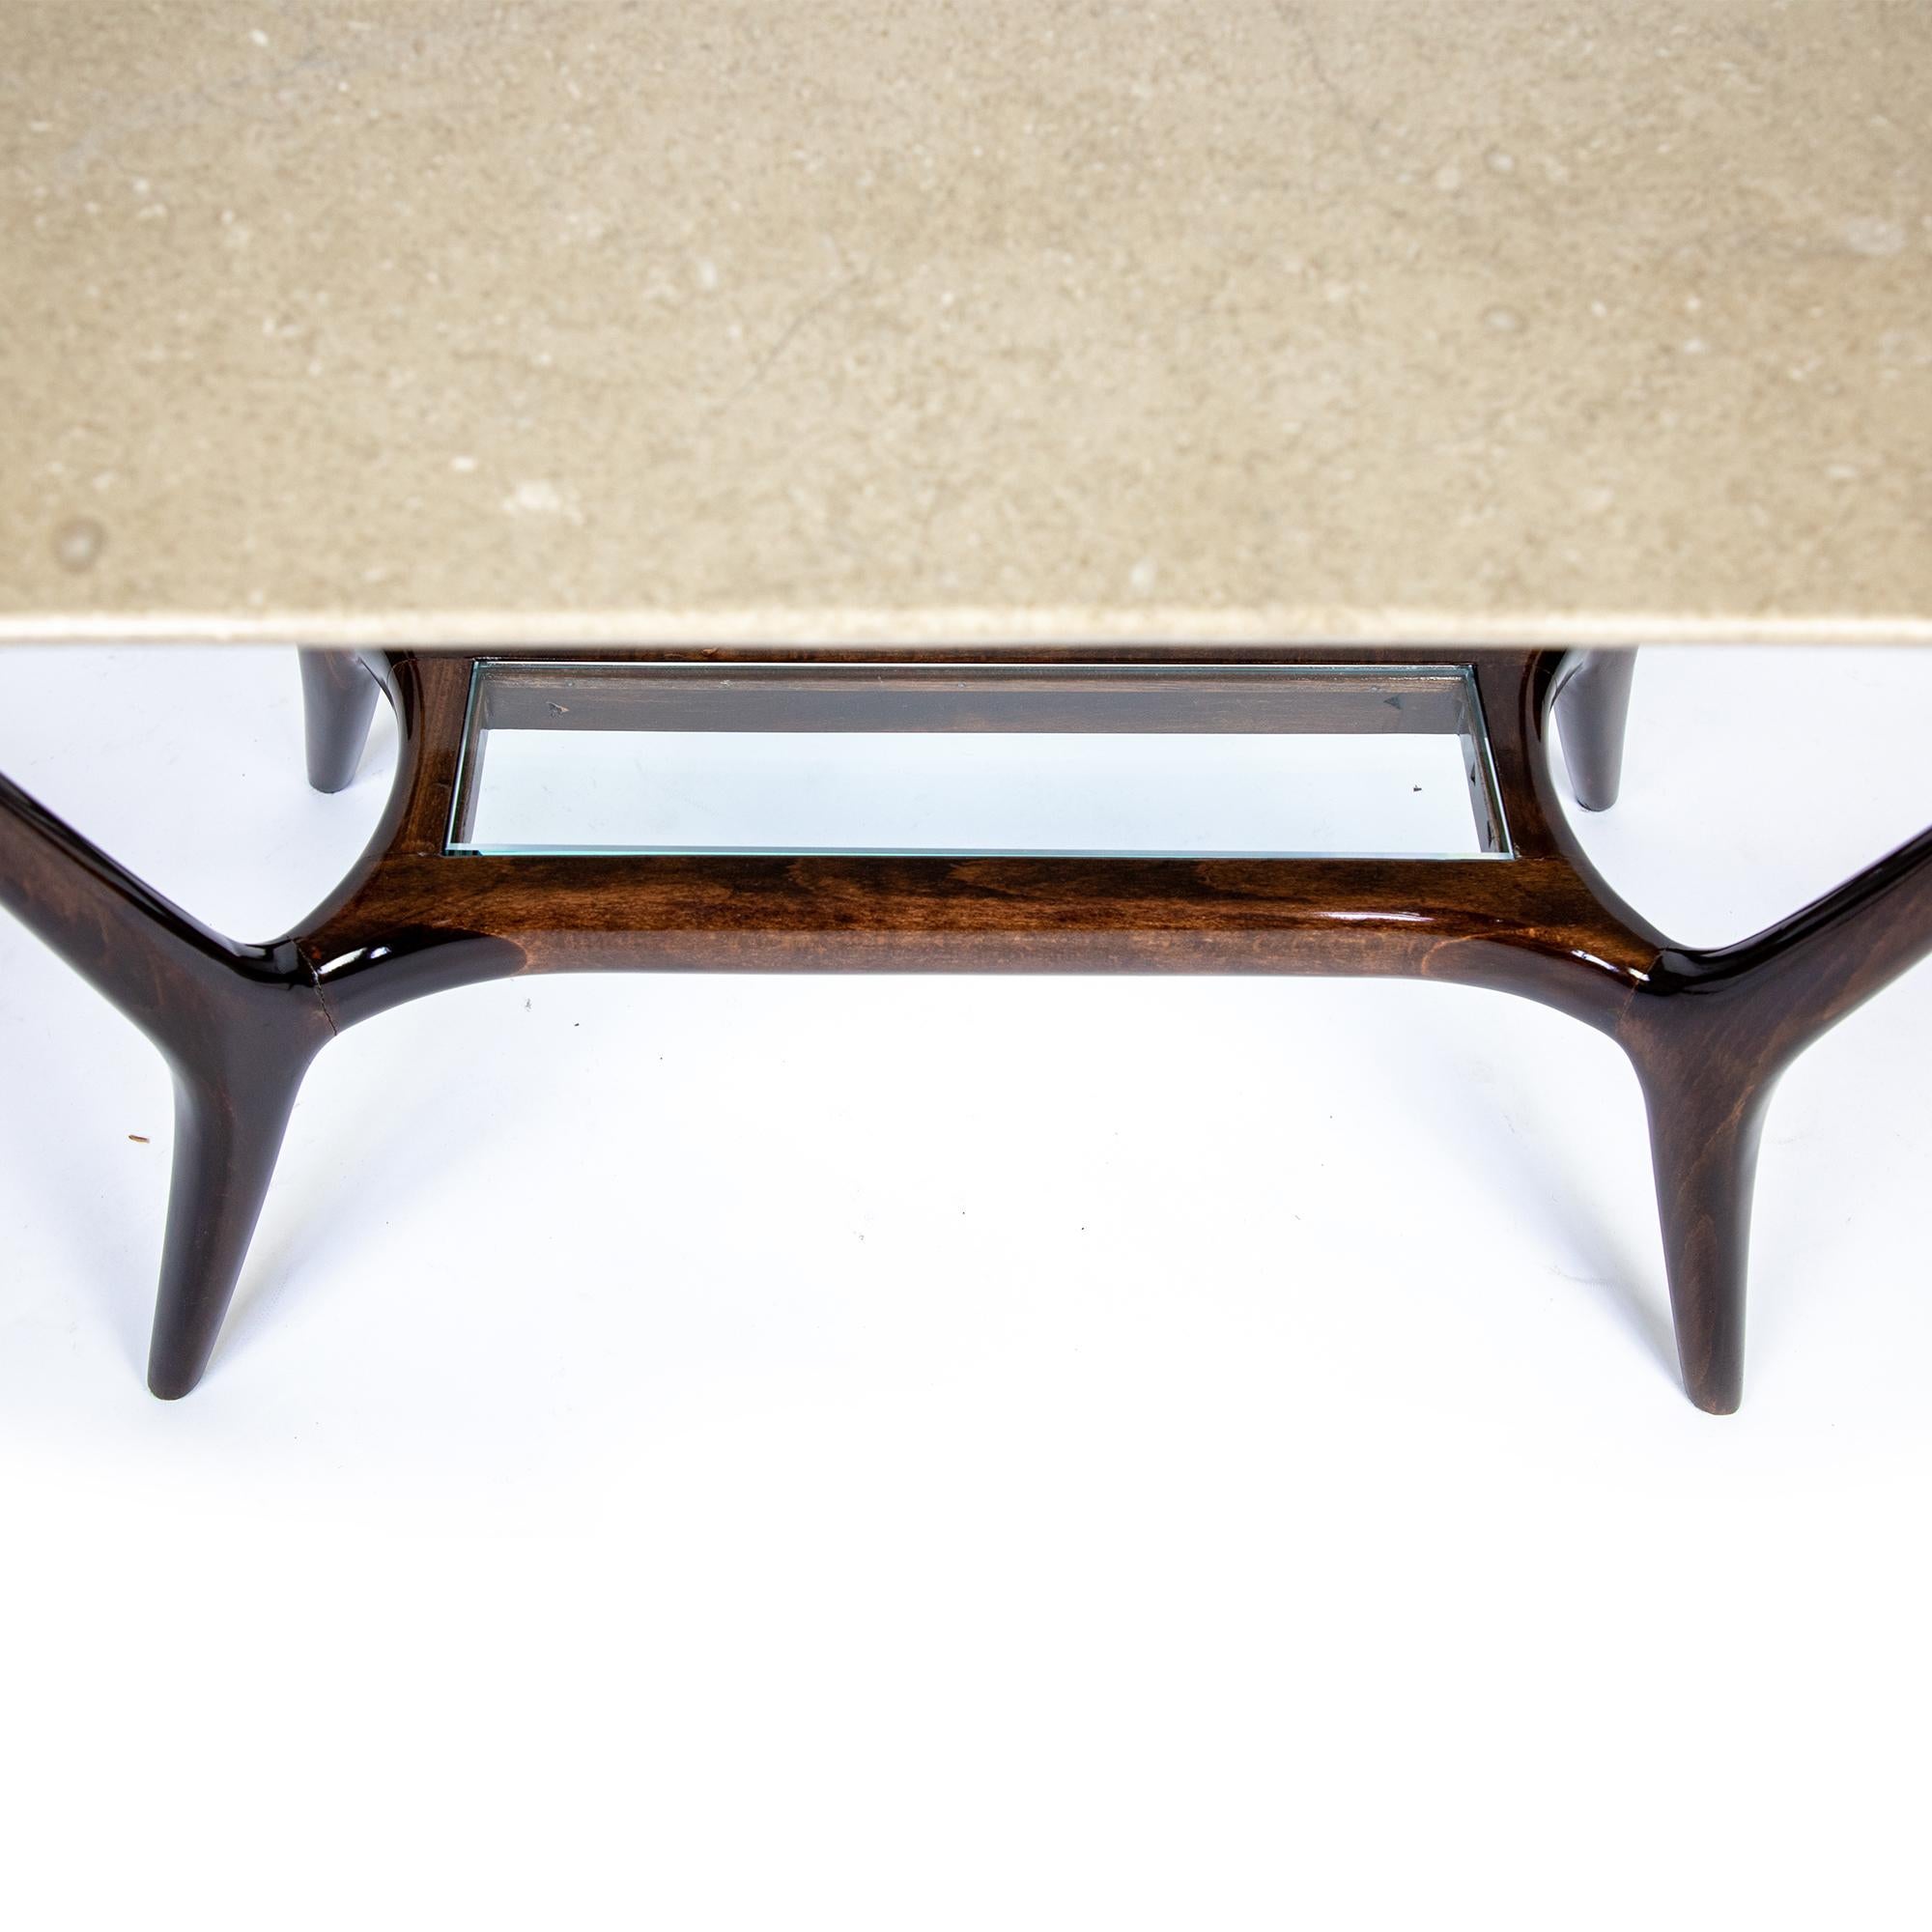 Mid-20th Century Italian Coffee Table with a Marble Top and Laquered Mahogany Wood, 1950s 